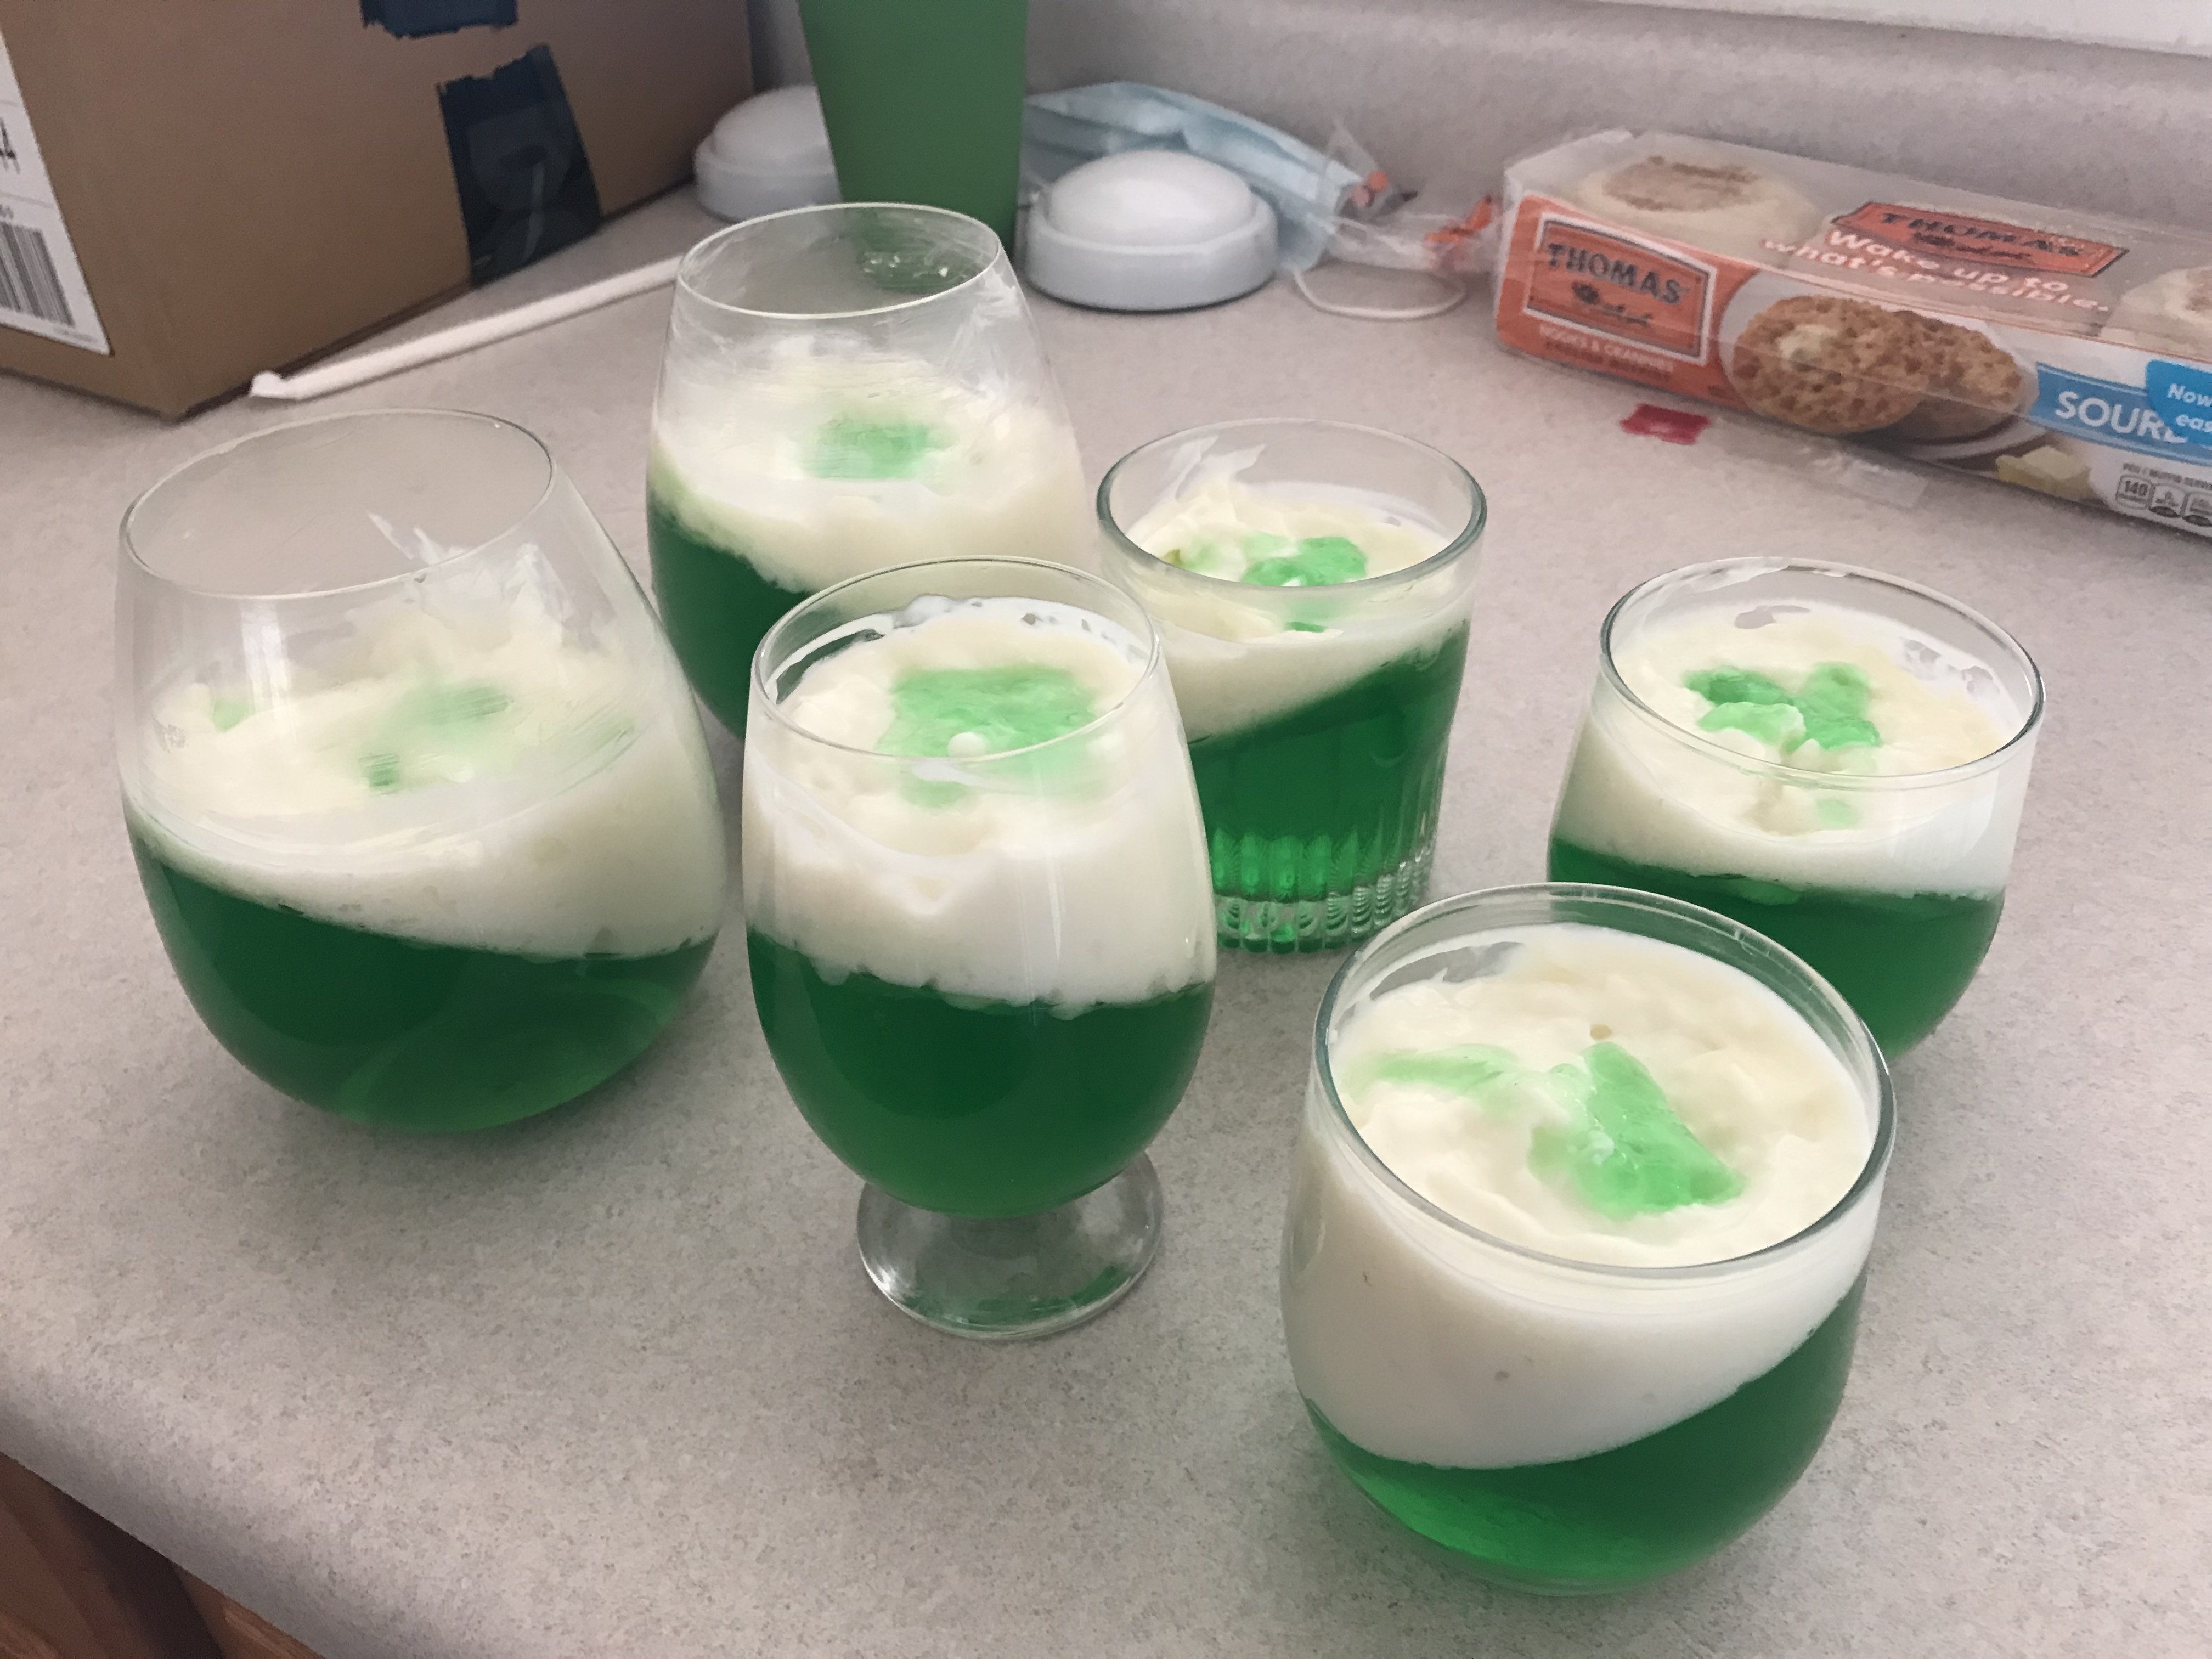 Green and white desserts